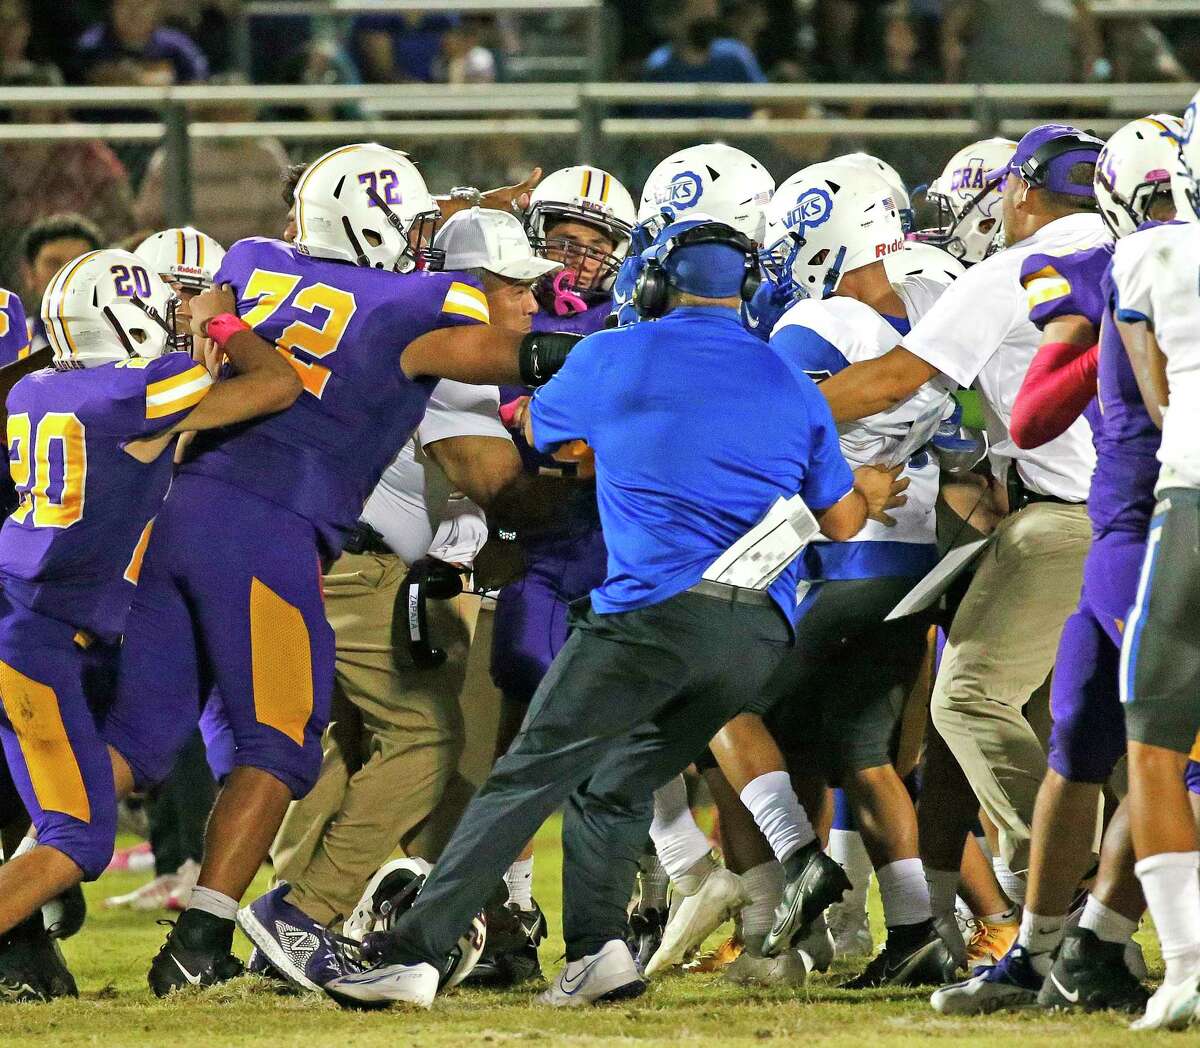 Coaches try to separate the teams after tempers got out of control in the fourth quarter. Lanier defeated Brackenridge 21-14 at SAISD Complex on Friday, September 17, 2021.